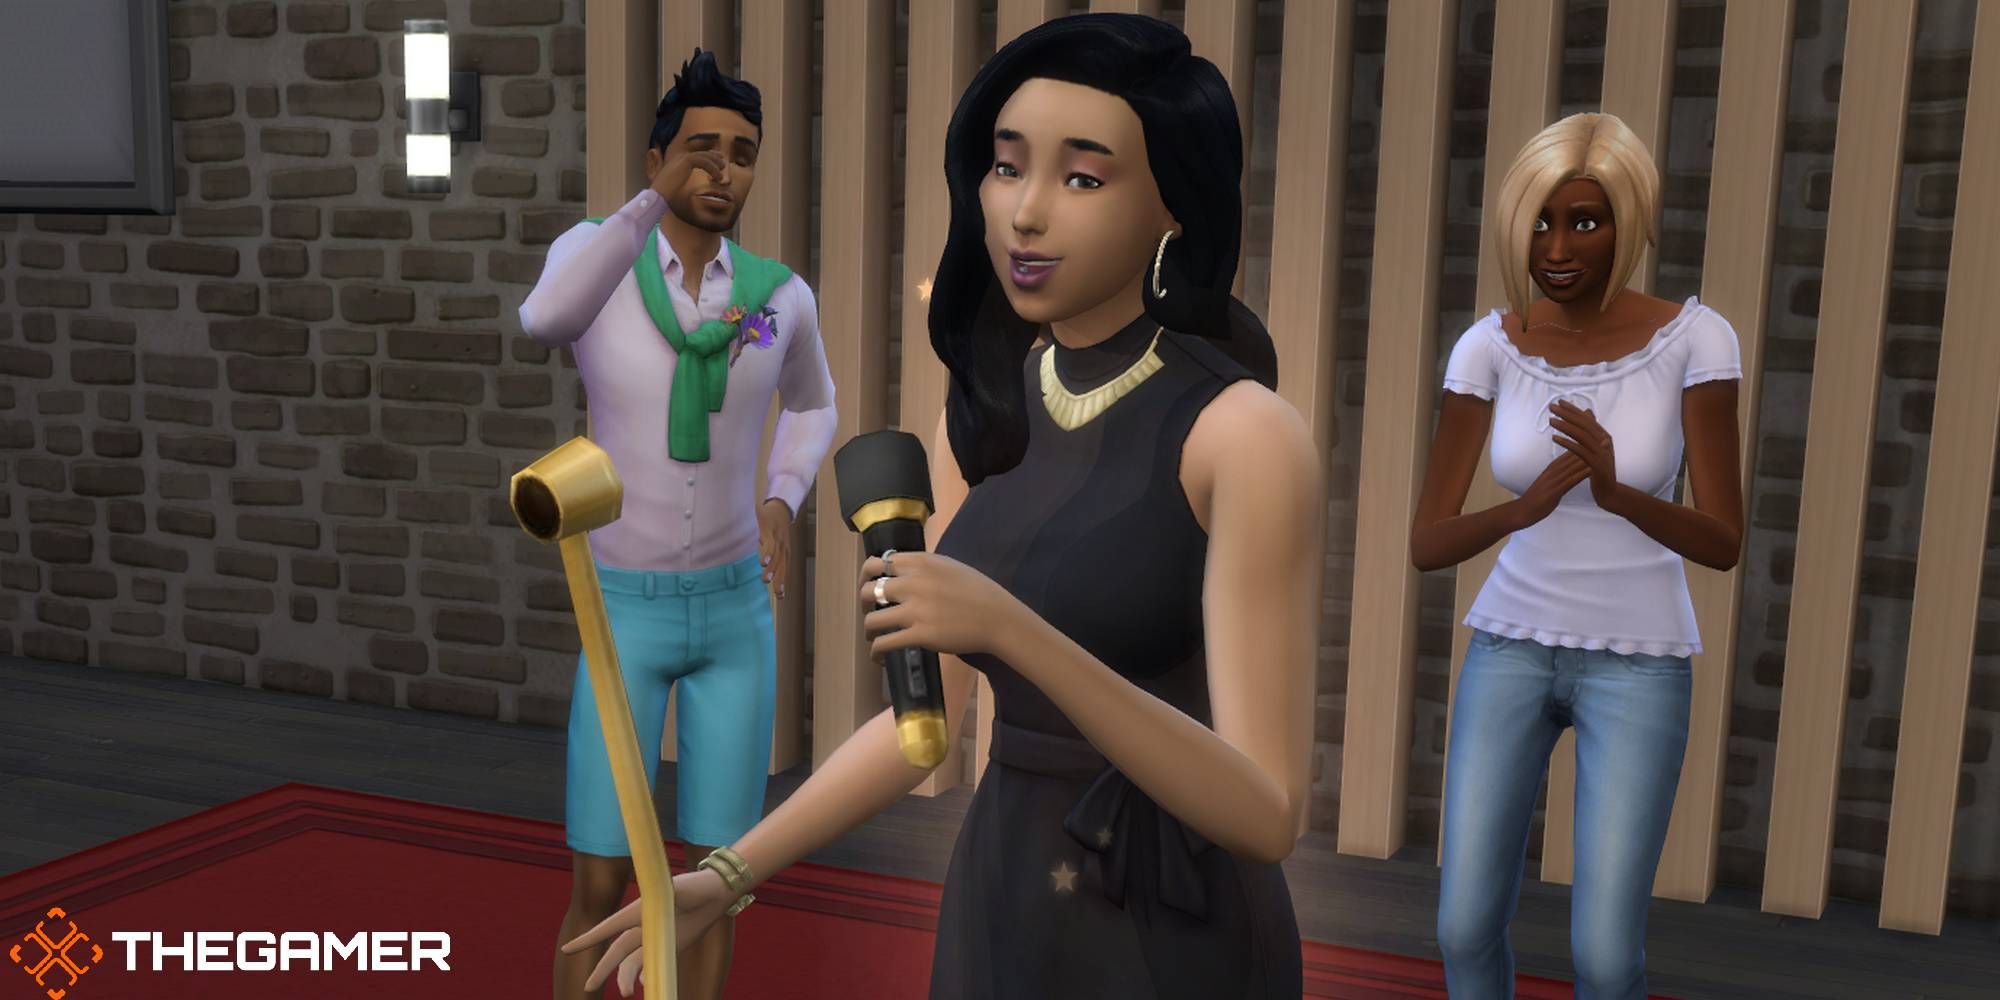 a sim singing at a night club with fans cheering for her in the sims 4 singer career sims 4 singing career